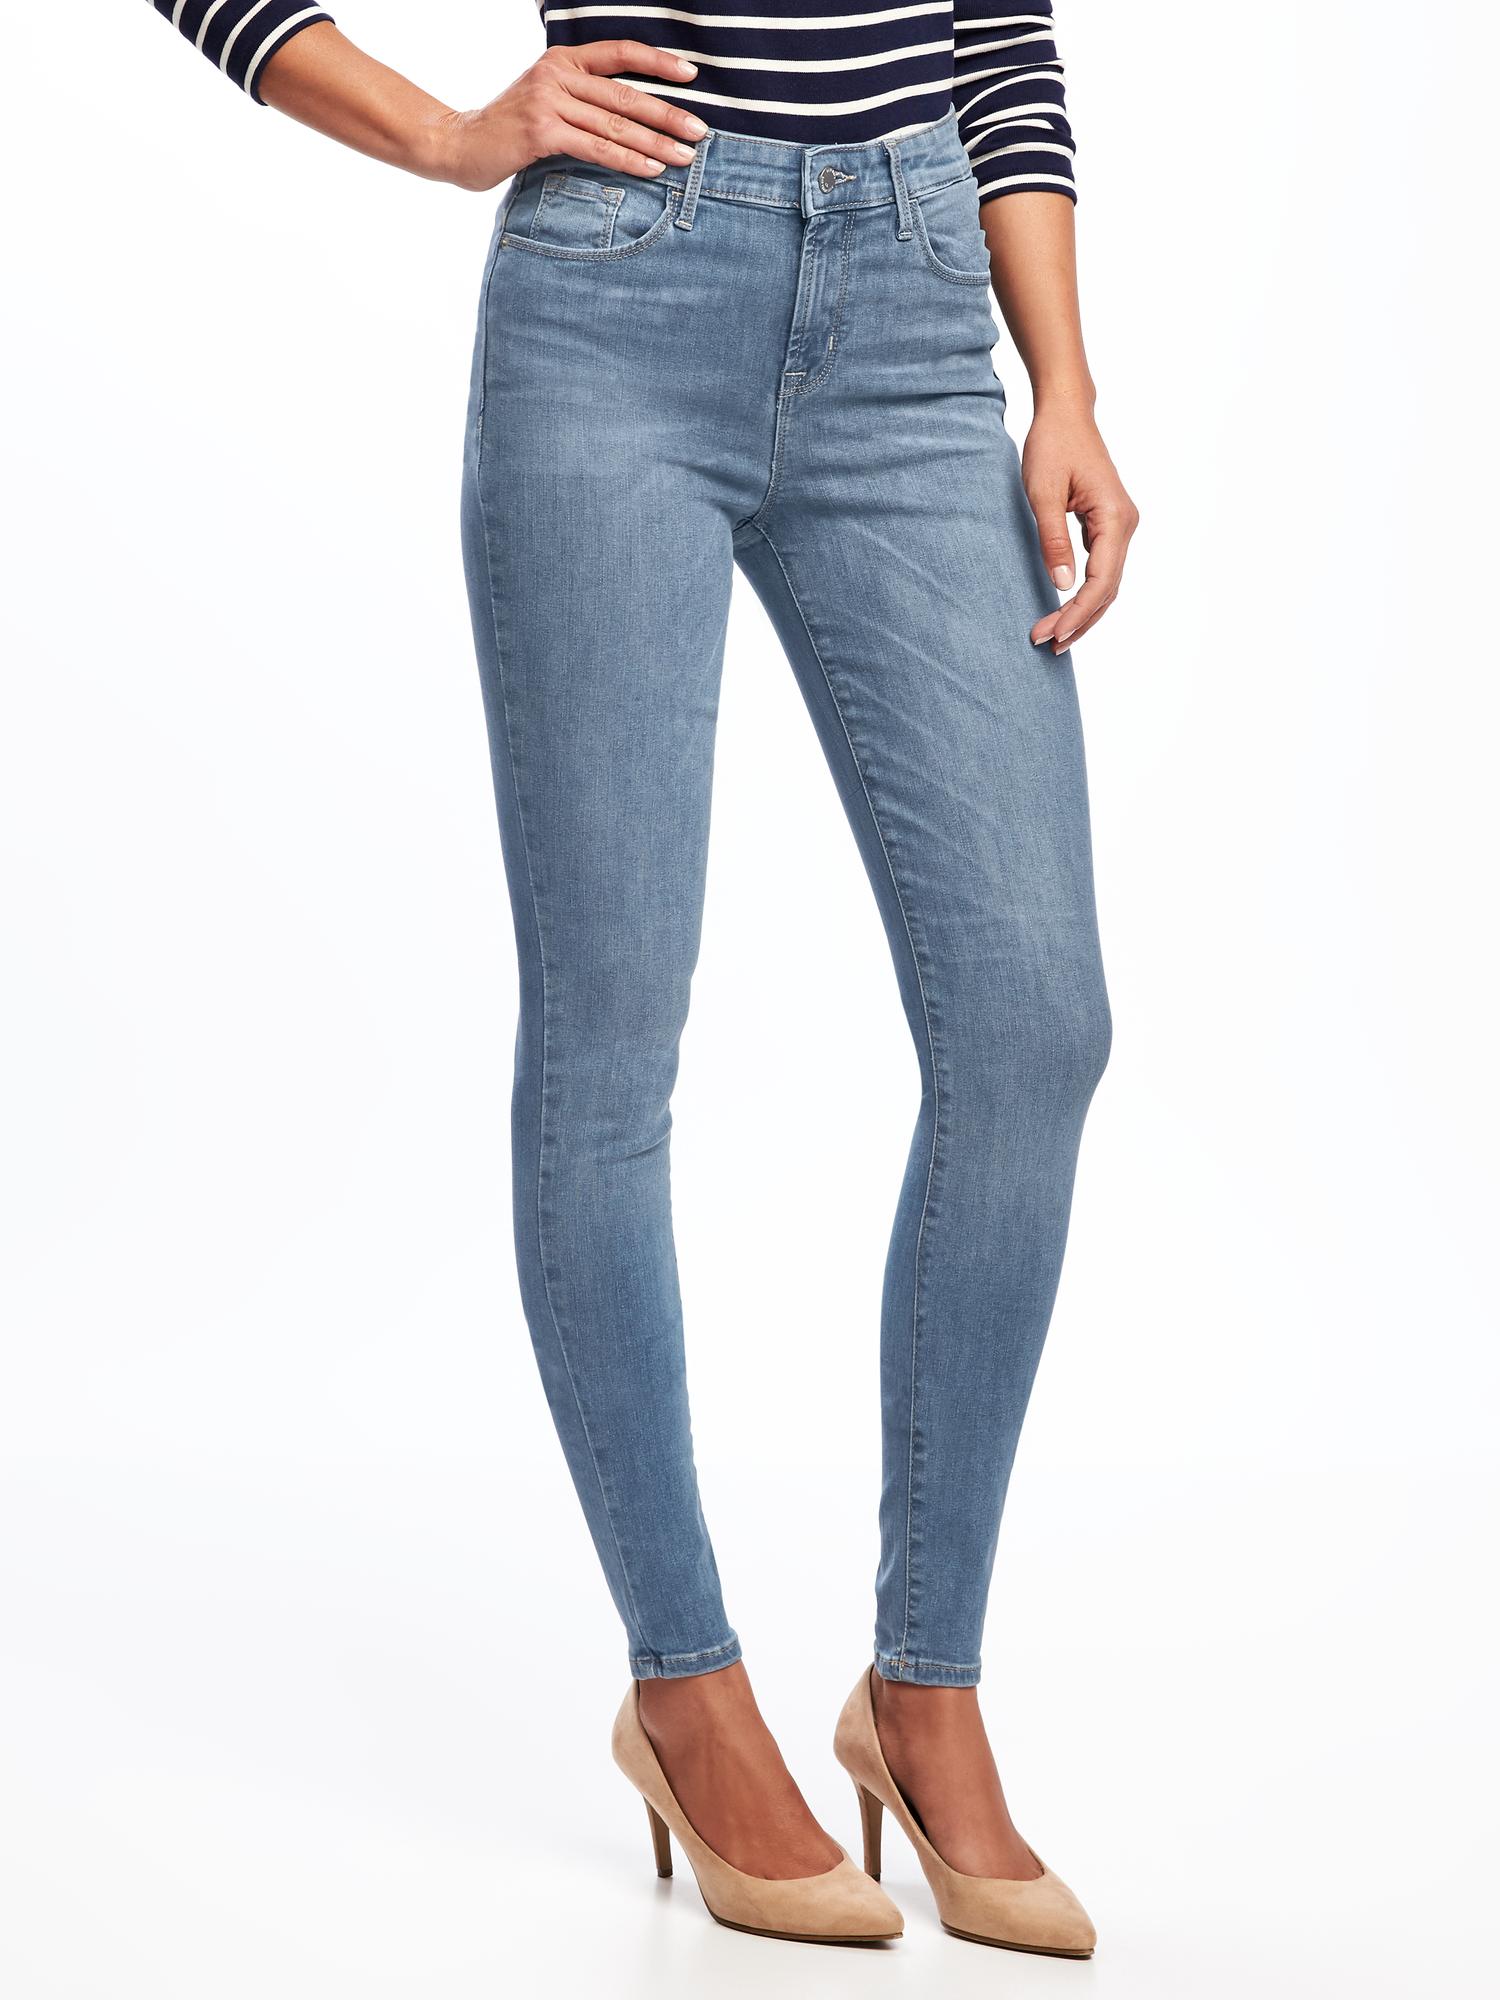 high rise rockstar jeans old navy